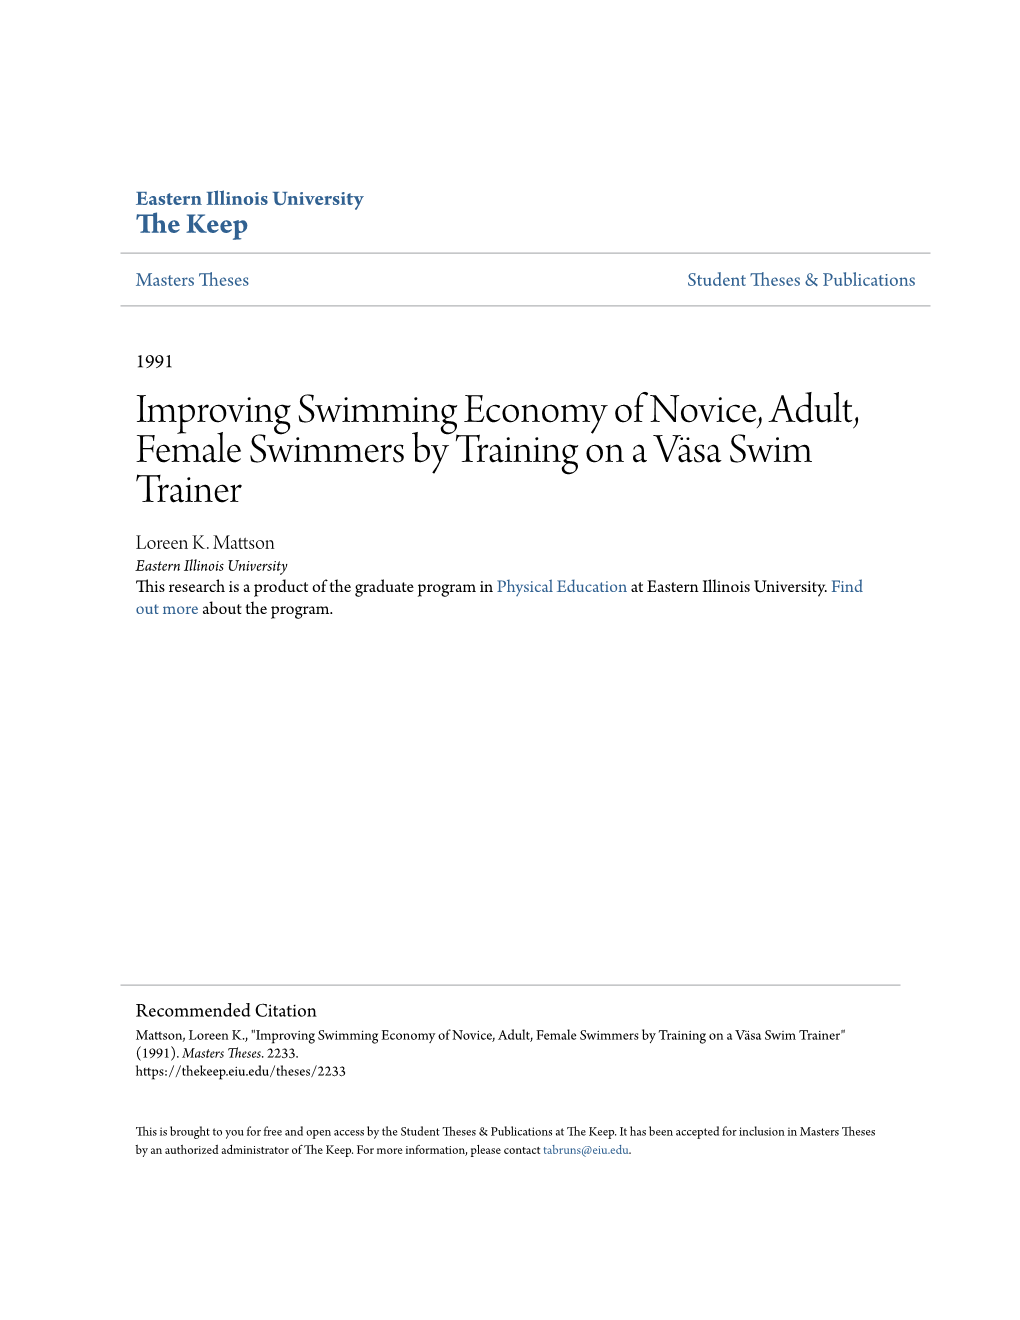 Improving Swimming Economy of Novice, Adult, Female Swimmers by Training on a Väsa Swim Trainer Loreen K